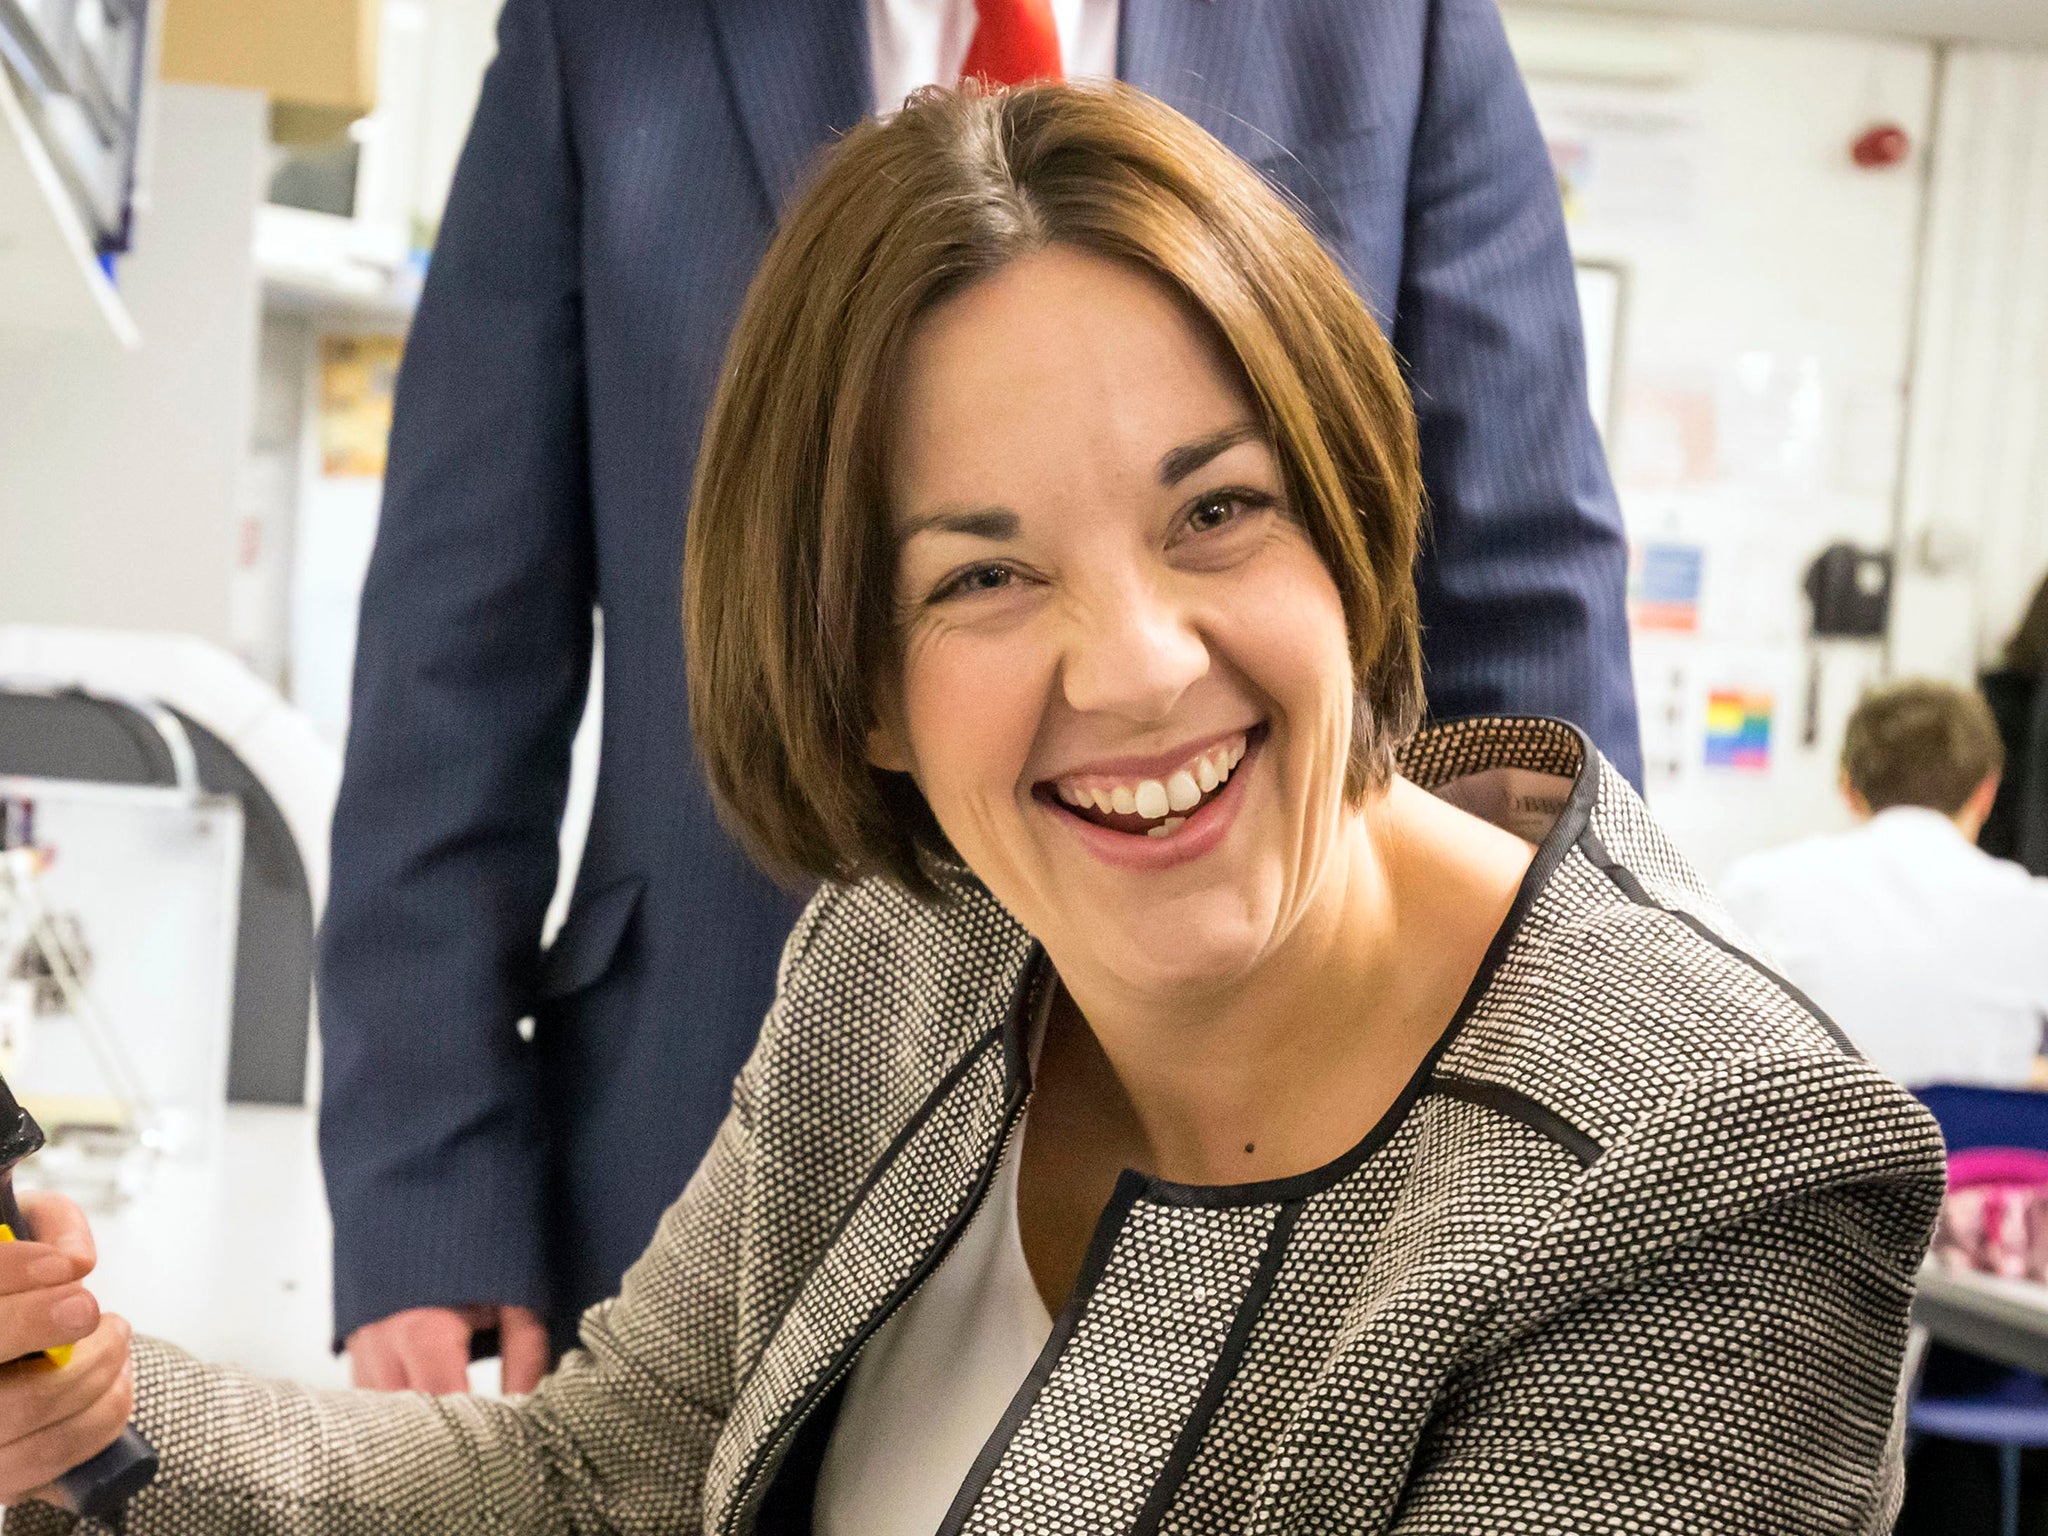 Leader Kezia Dugdale has promised to invest £500m in primary care